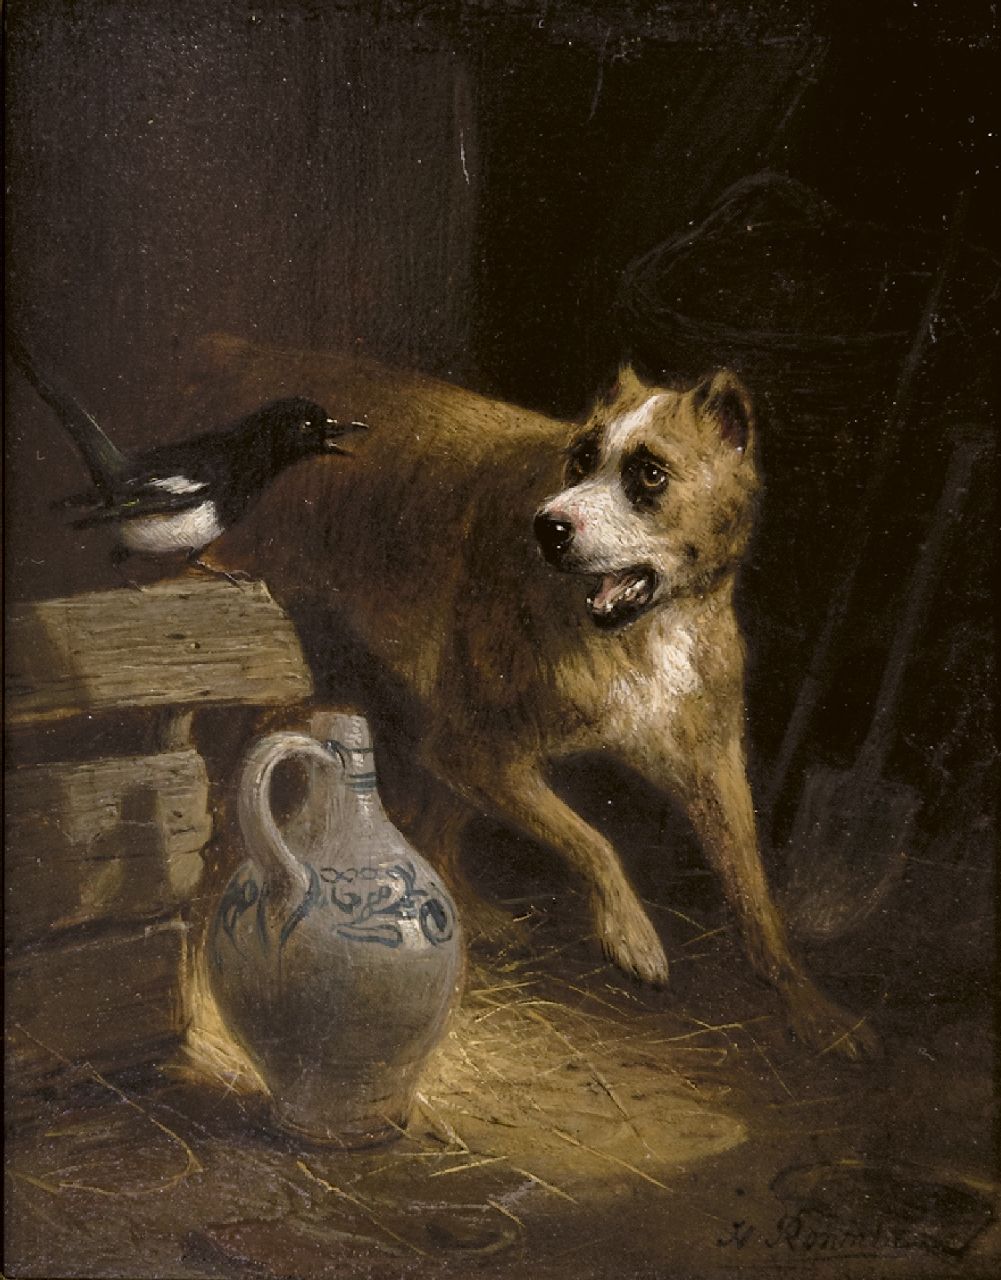 Ronner-Knip H.  | Henriette Ronner-Knip | Paintings offered for sale | The cheeky visitor, oil on panel 19.2 x 15.7 cm, signed l.r.